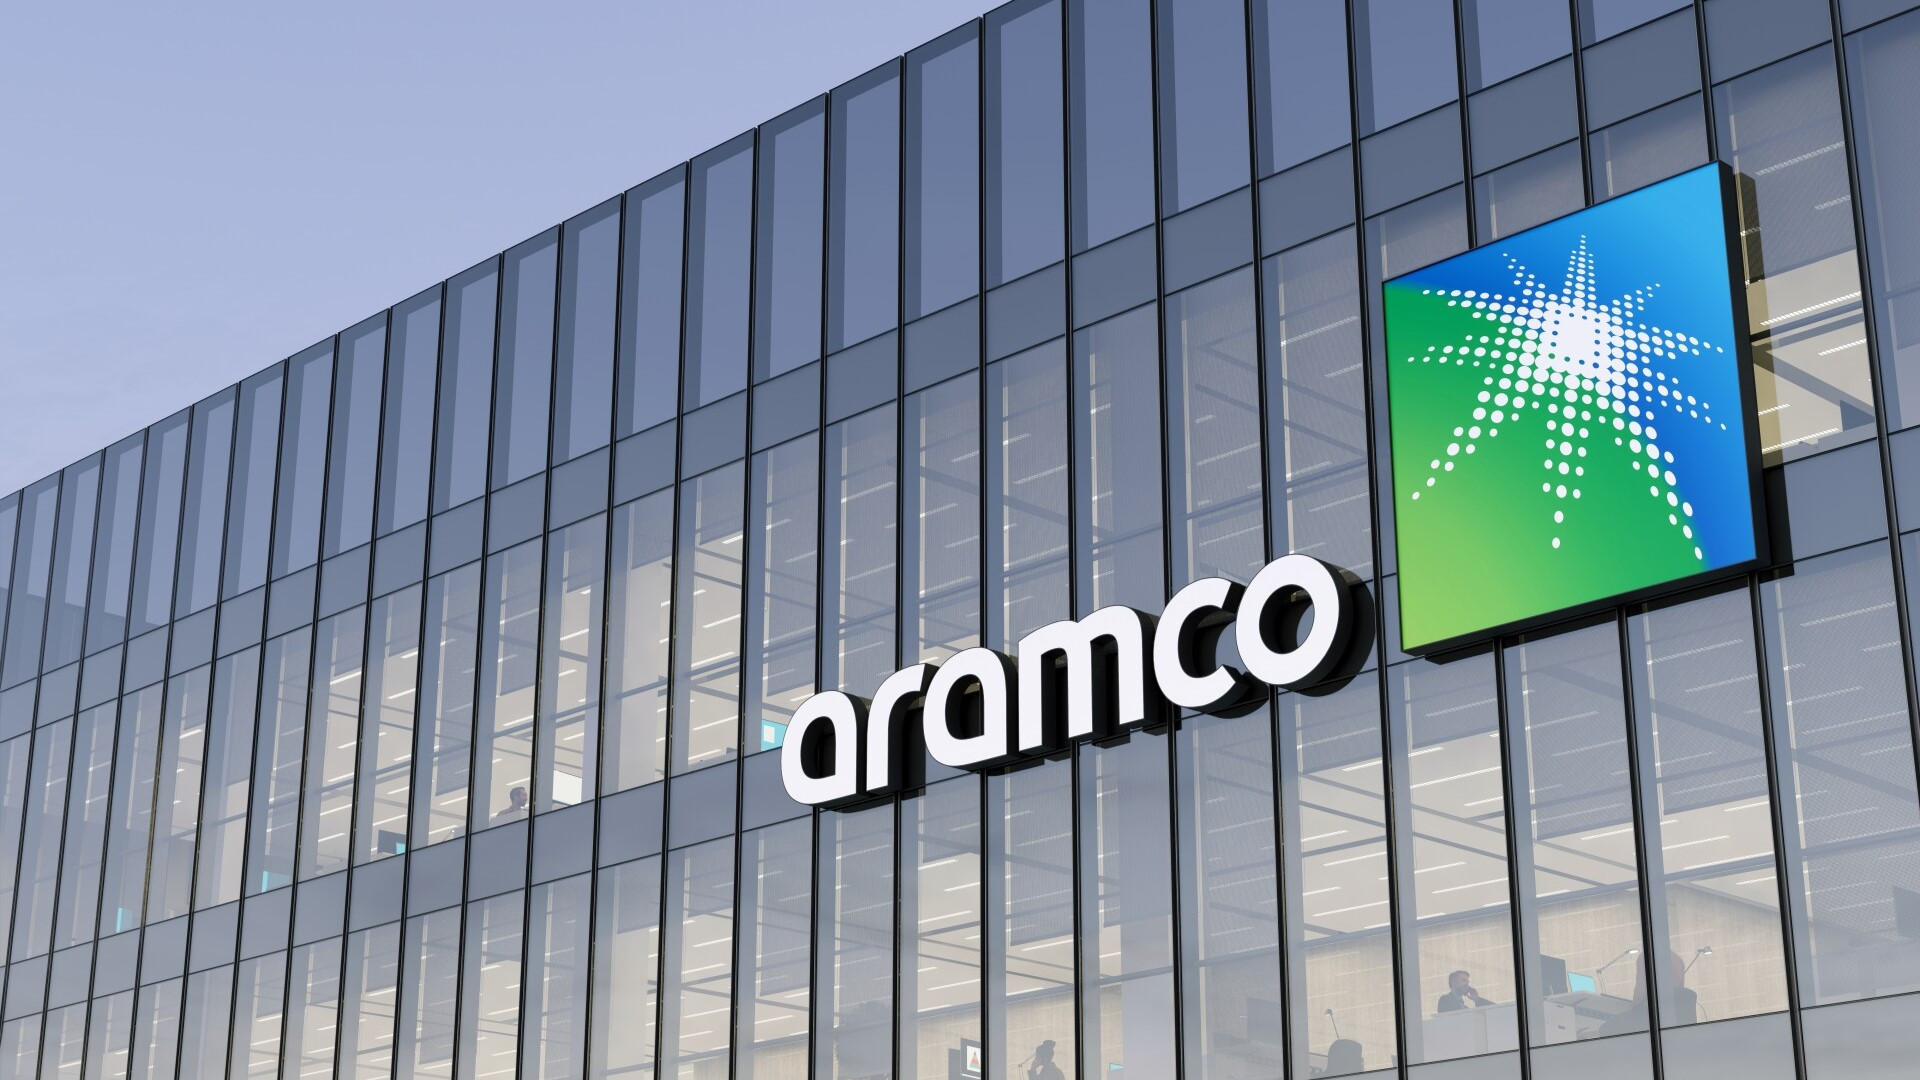 Saudi Aramco soars to become world's second largest company